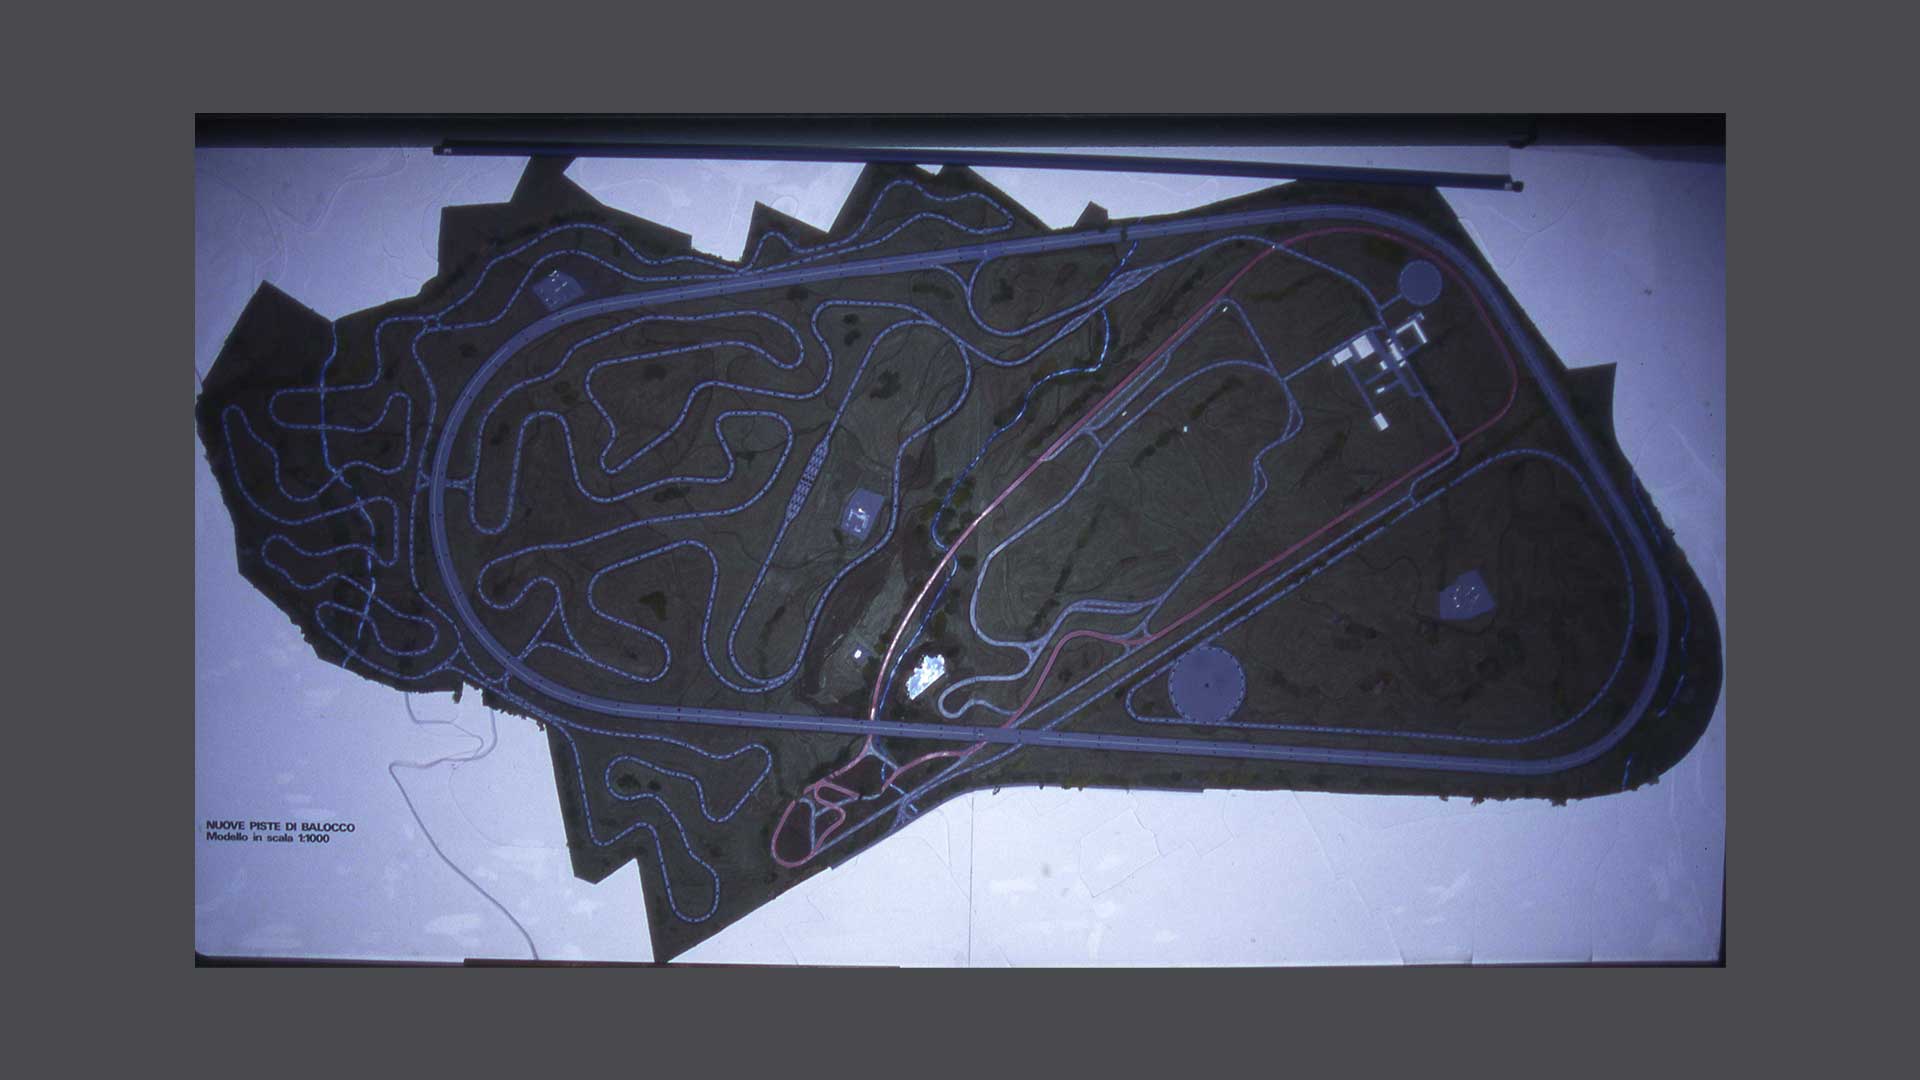 Image of a map of the tracks of Balocco